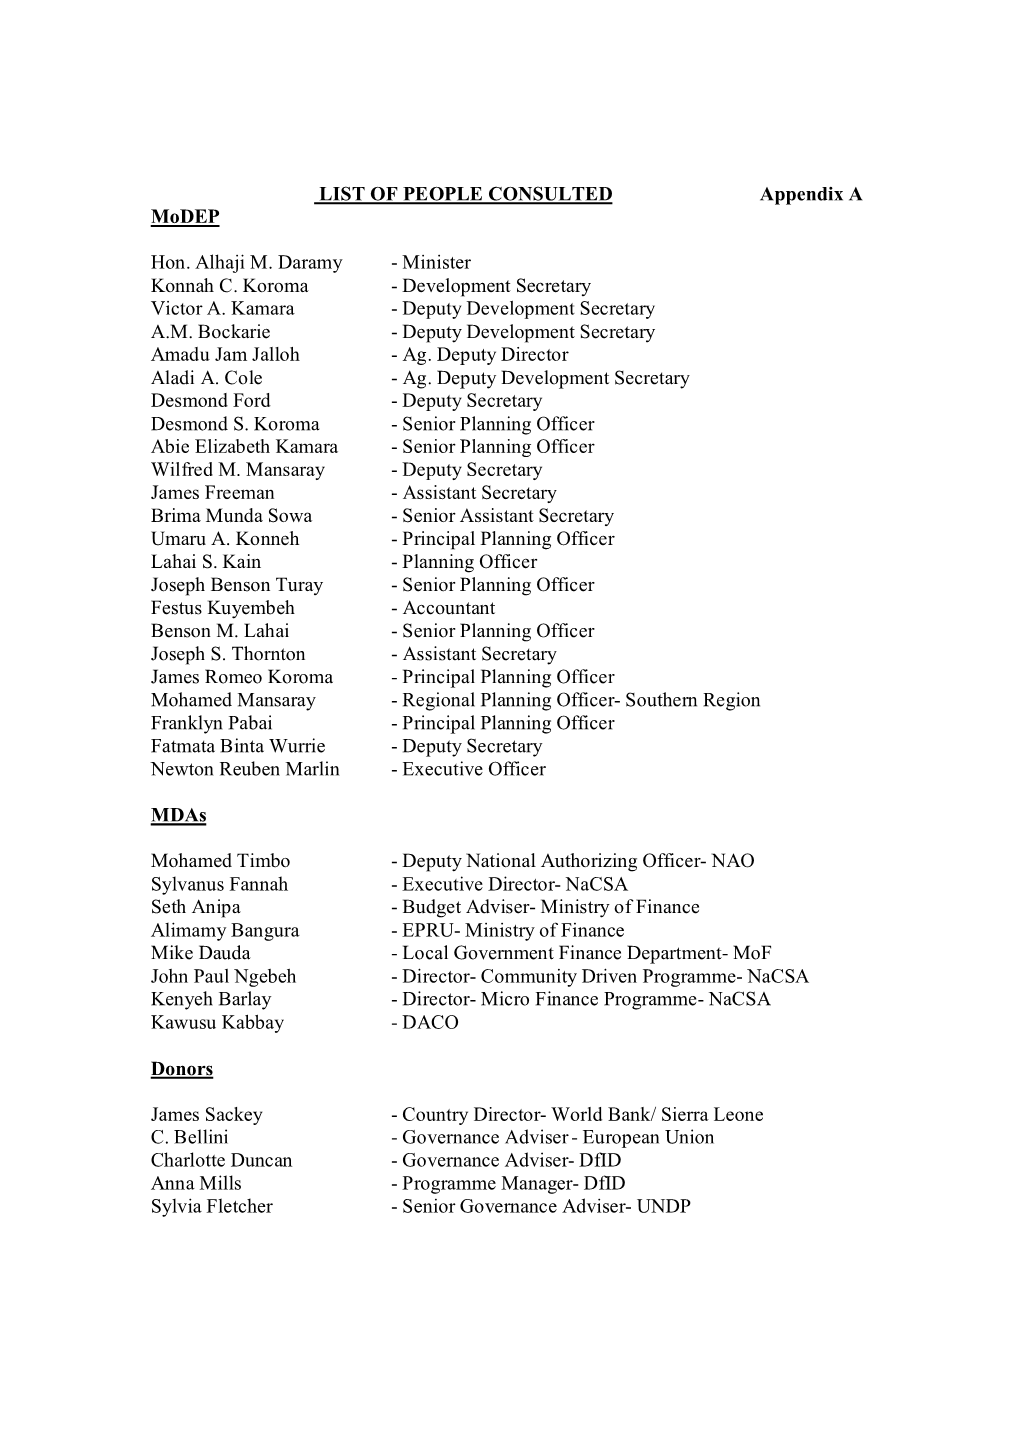 LIST of PEOPLE CONSULTED.Pdf